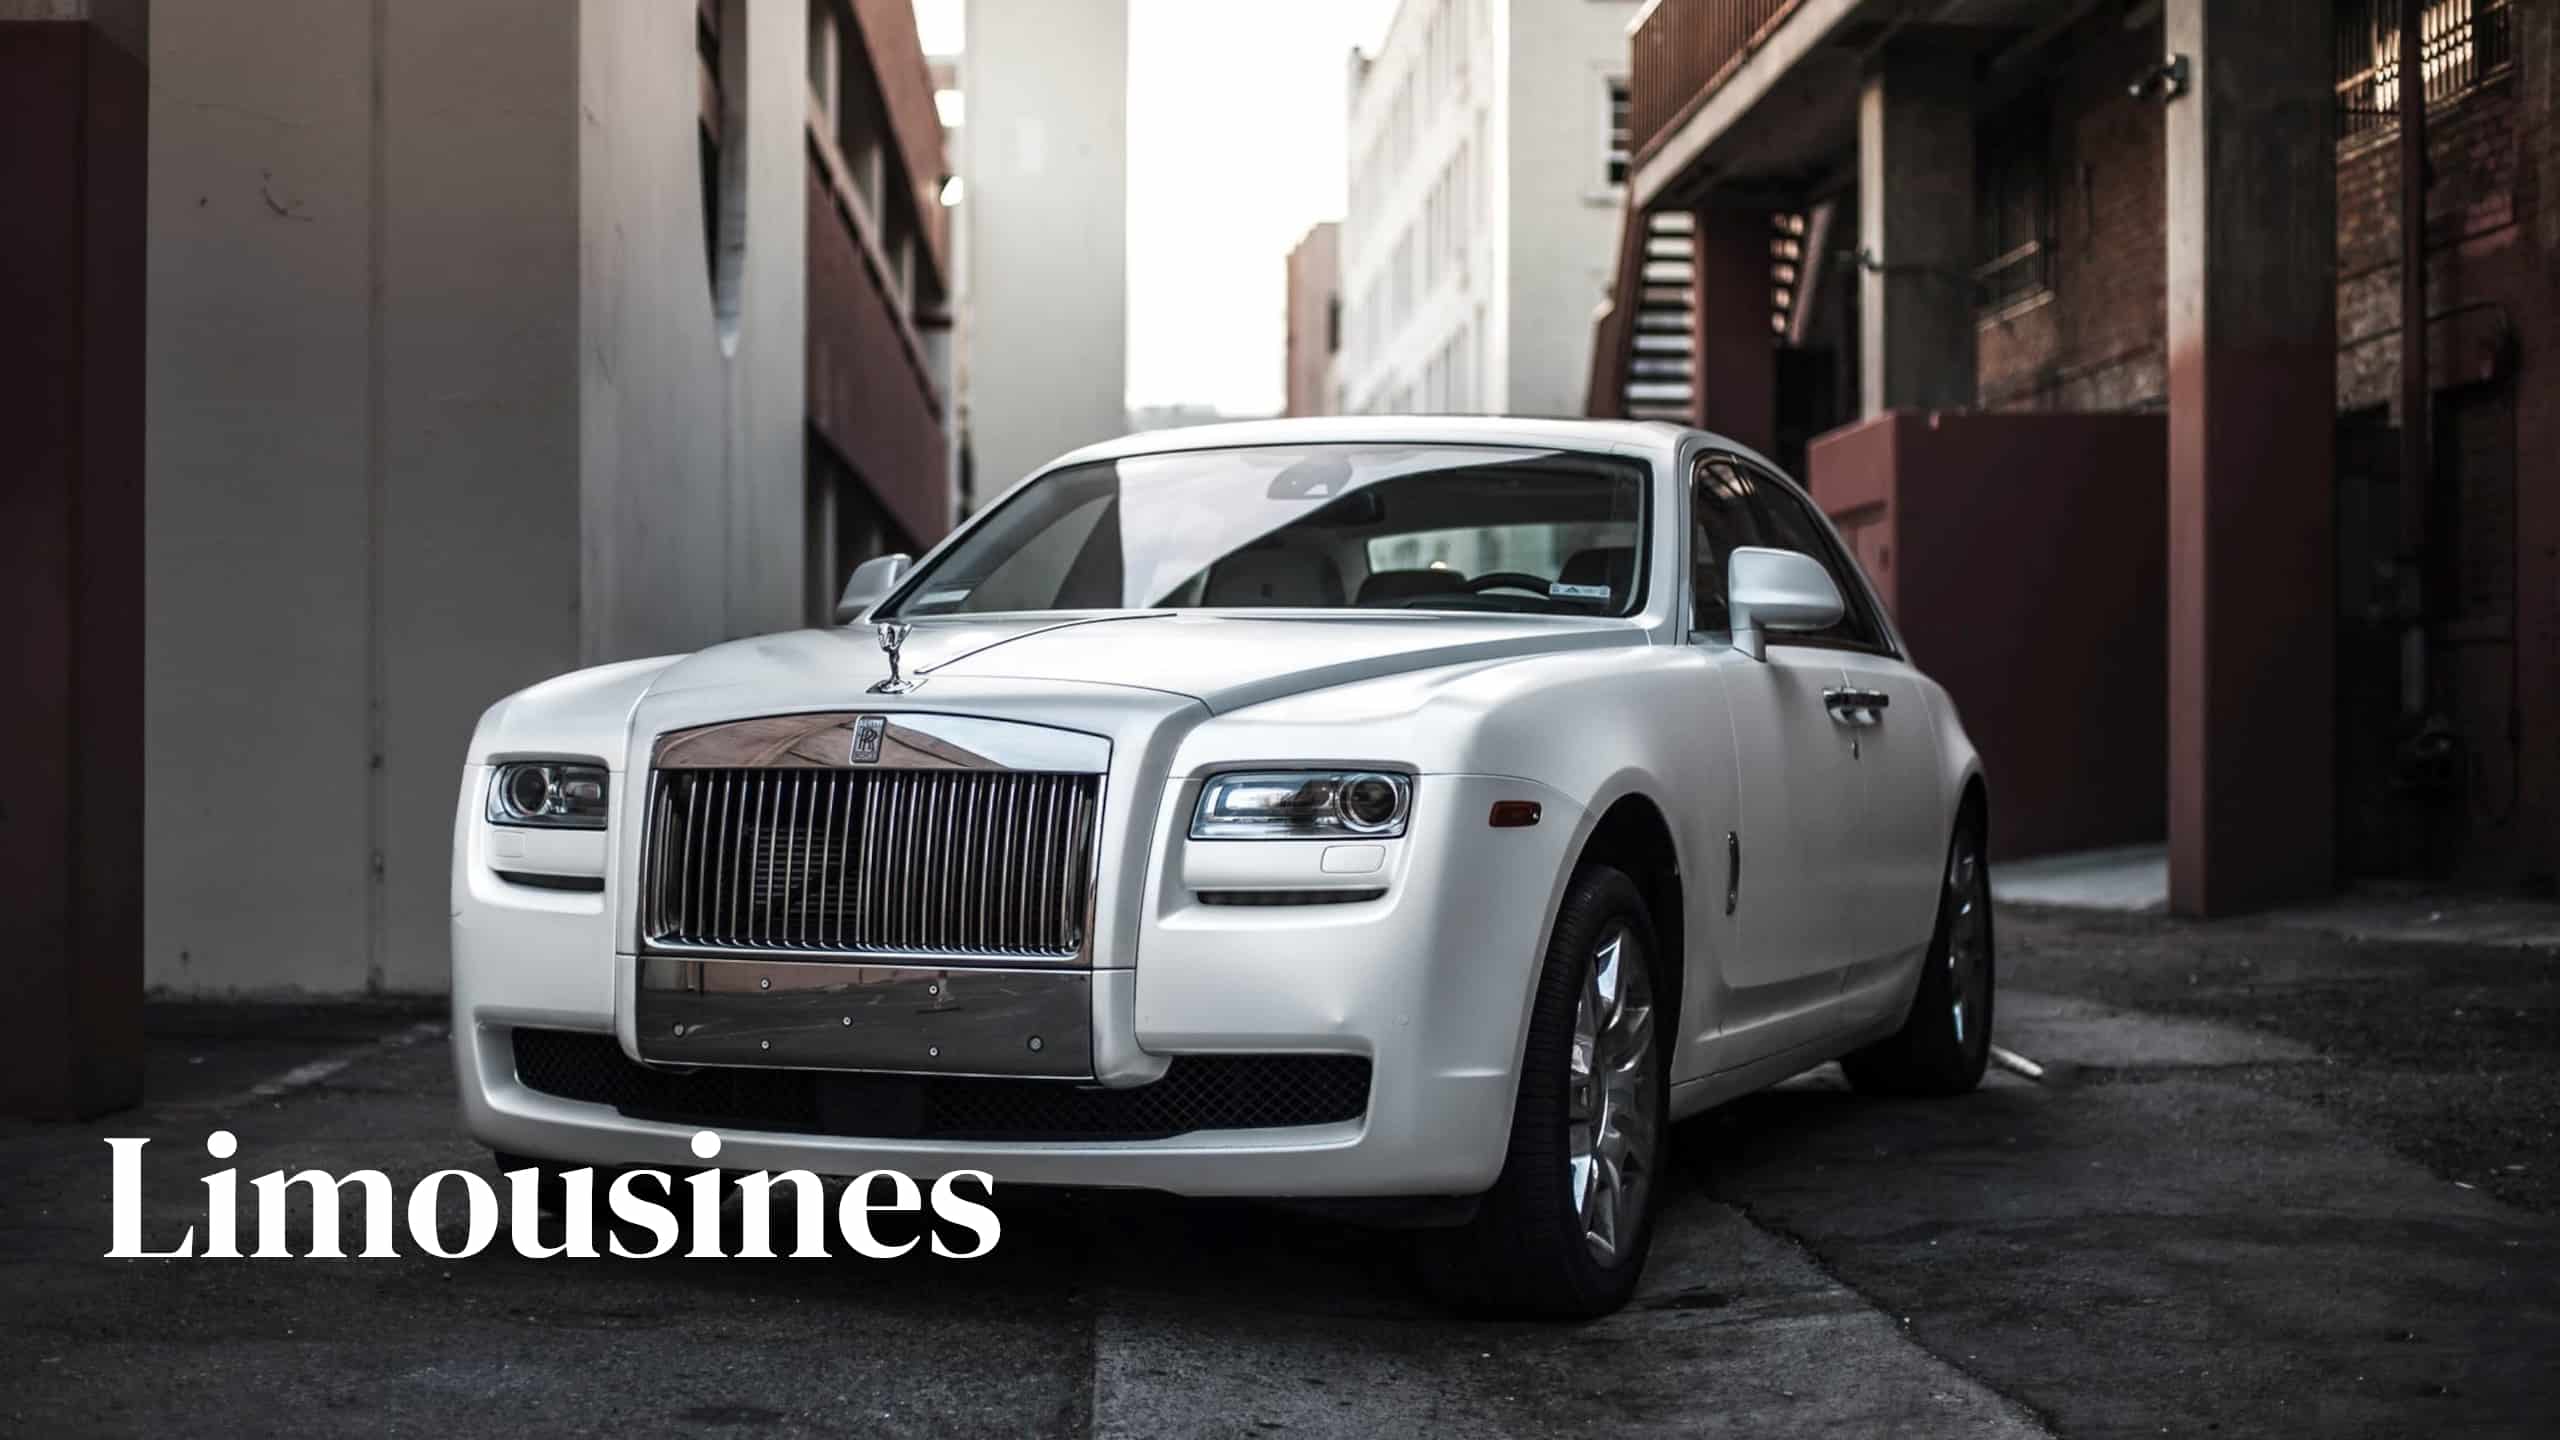 buy limousines with bitcoin and crypto